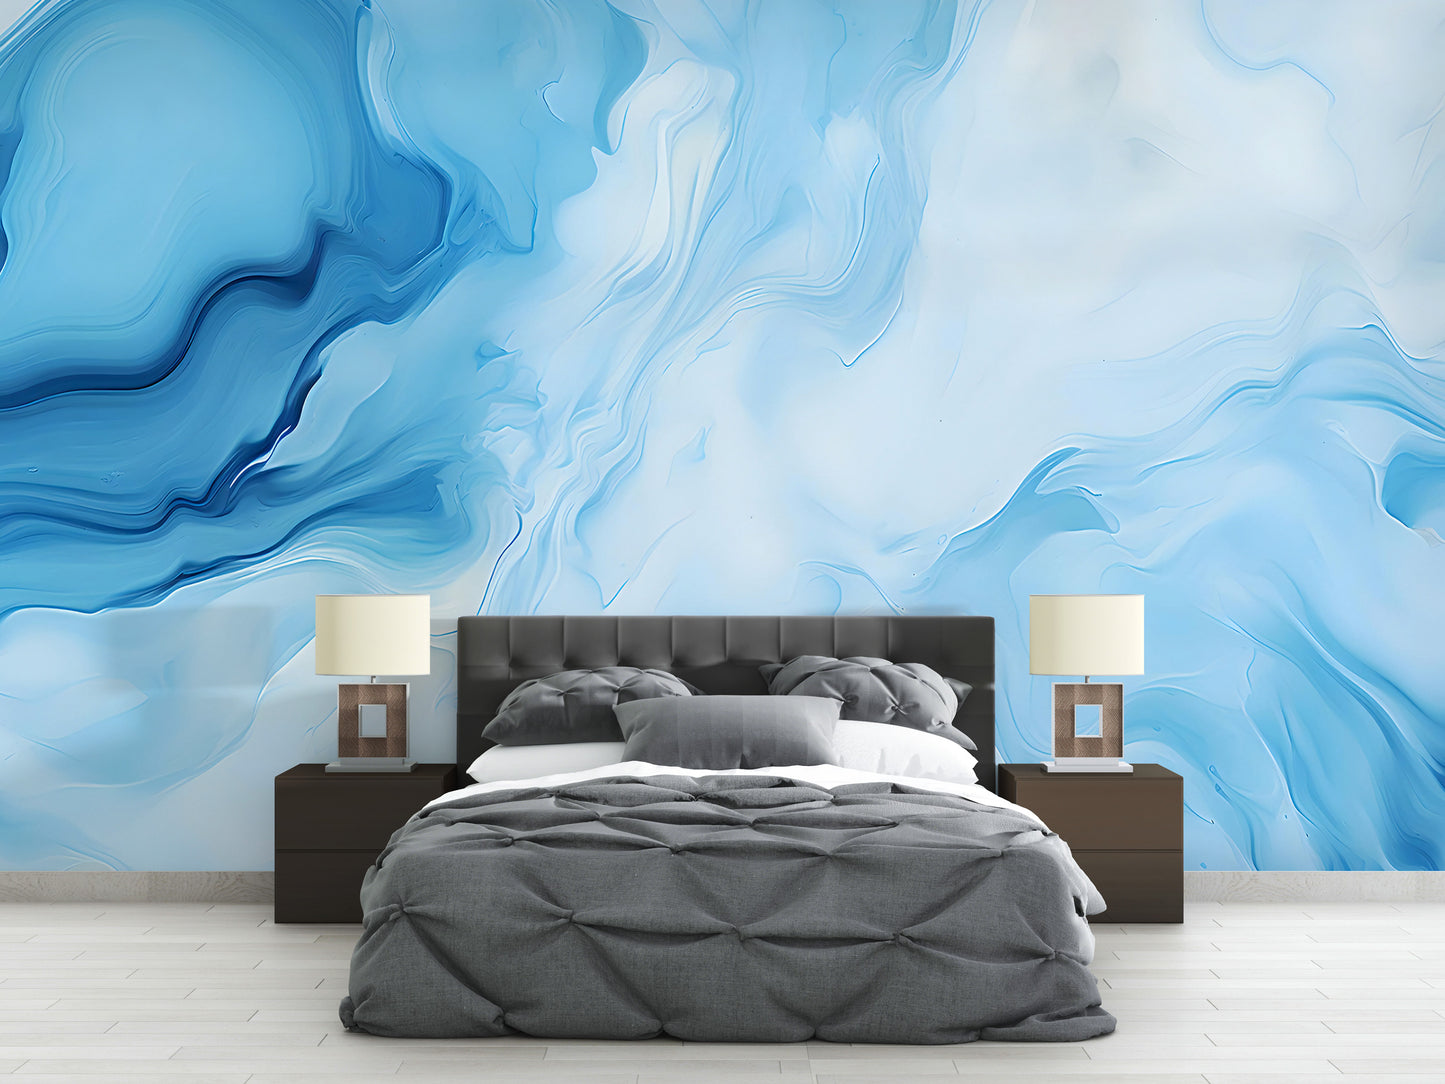 Artistic Alcohol Ink Wall Mural